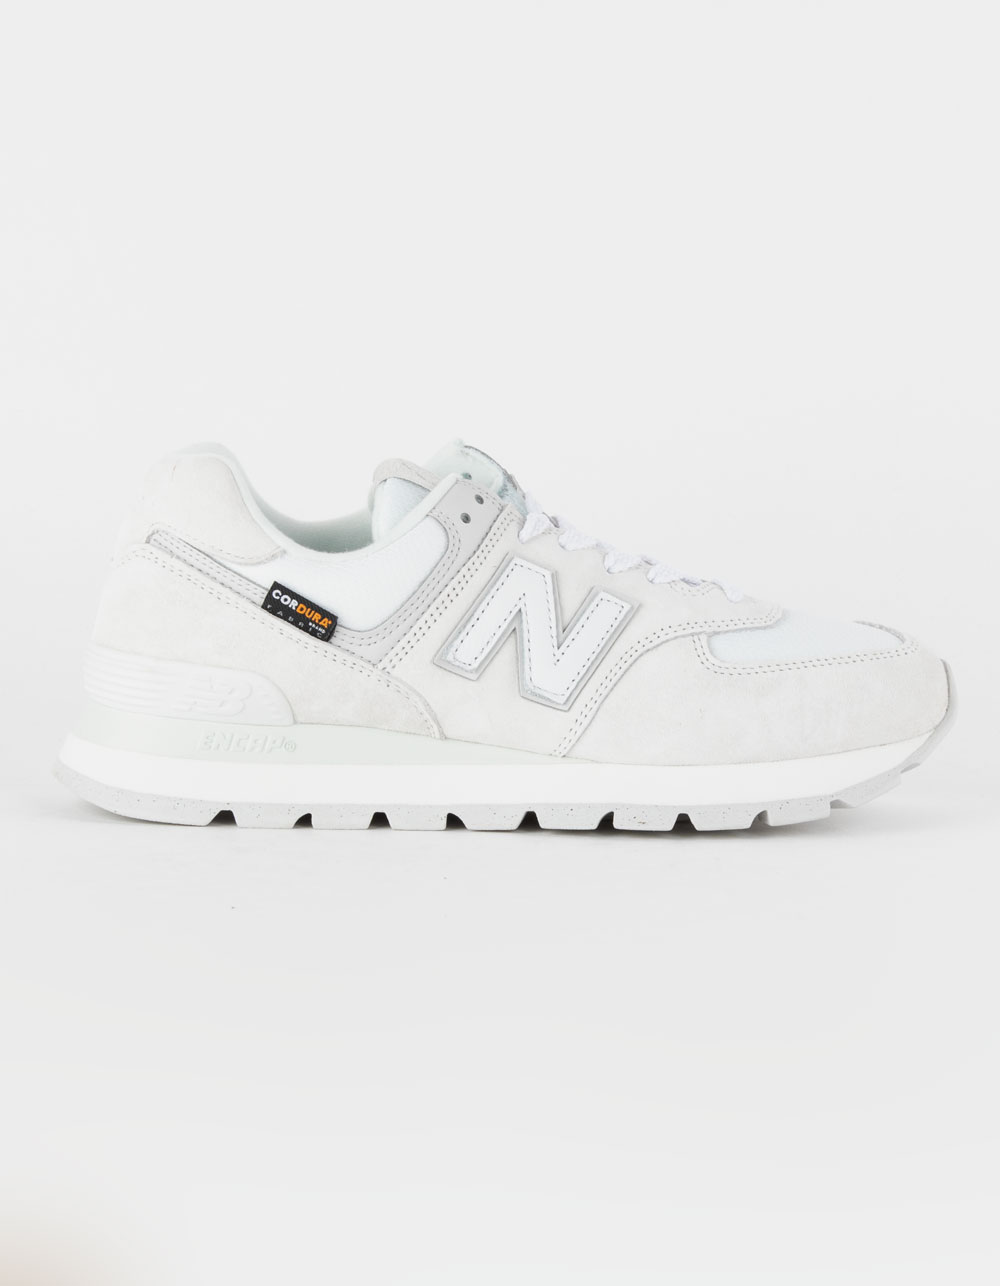 NEW BALANCE 574 Mens Shoes - WHITE | Tillys